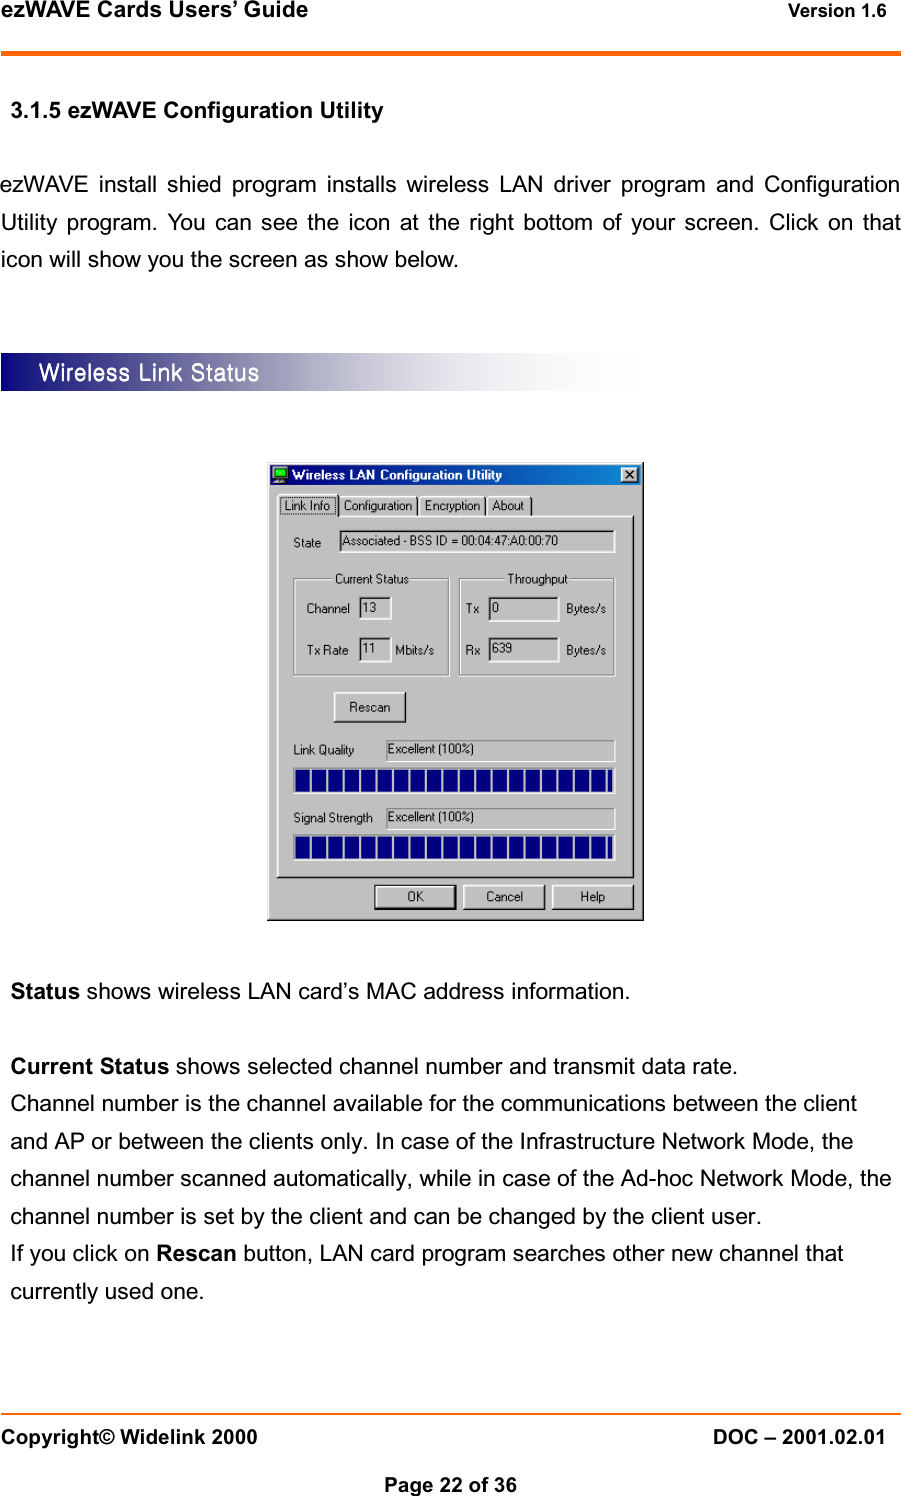 ezWAVE Cards Users’ Guide Version 1.6 Copyright© Widelink 2000 DOC – 2001.02.01Page 22 of 36 3.1.5 ezWAVE Configuration UtilityezWAVE install shied program installs wireless LAN driver program and ConfigurationUtility program. You can see the icon at the right bottom of your screen. Click on thaticon will show you the screen as show below.Status shows wireless LAN card’s MAC address information.Current Status shows selected channel number and transmit data rate.Channel number is the channel available for the communications between the clientand AP or between the clients only. In case of the Infrastructure Network Mode, thechannel number scanned automatically, while in case of the Ad-hoc Network Mode, thechannel number is set by the client and can be changed by the client user.If you click on Rescan button, LAN card program searches other new channel thatcurrently used one.Wireless Link StatusWireless Link StatusWireless Link StatusWireless Link Status    